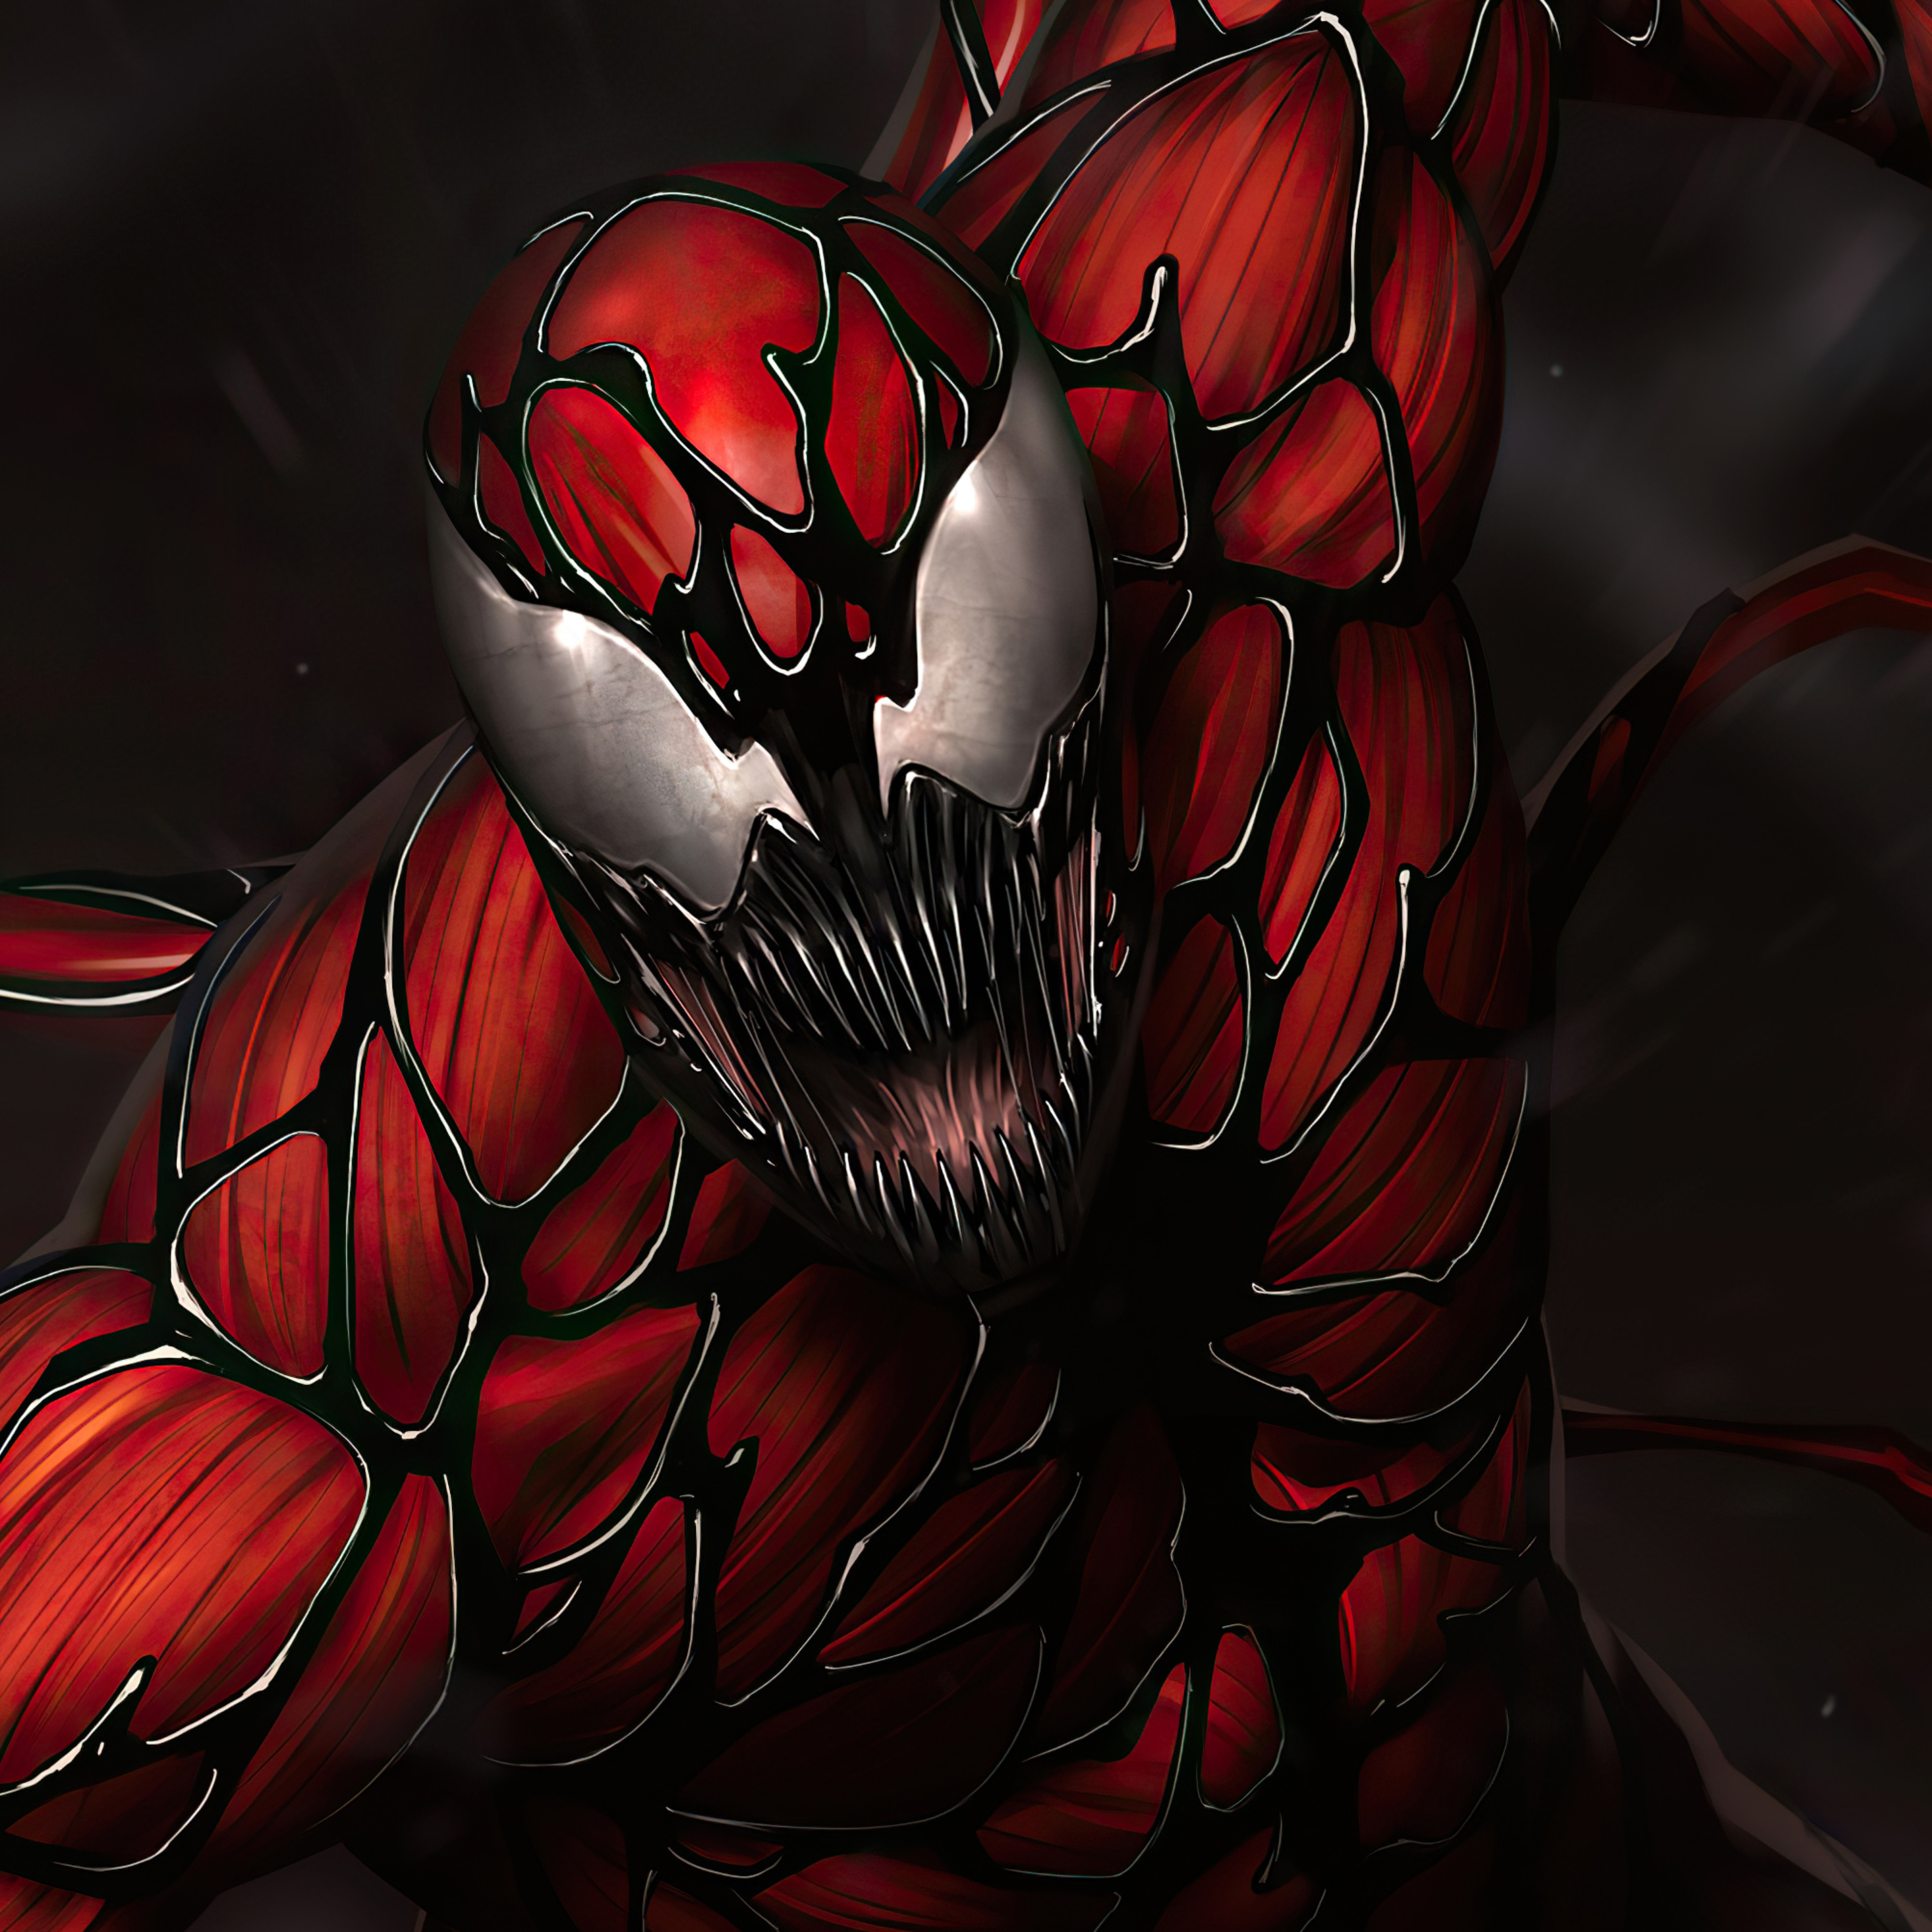 Carnage Coming 4k In 2932x2932 Resolution. carnage-coming-4k-go.jpg. 